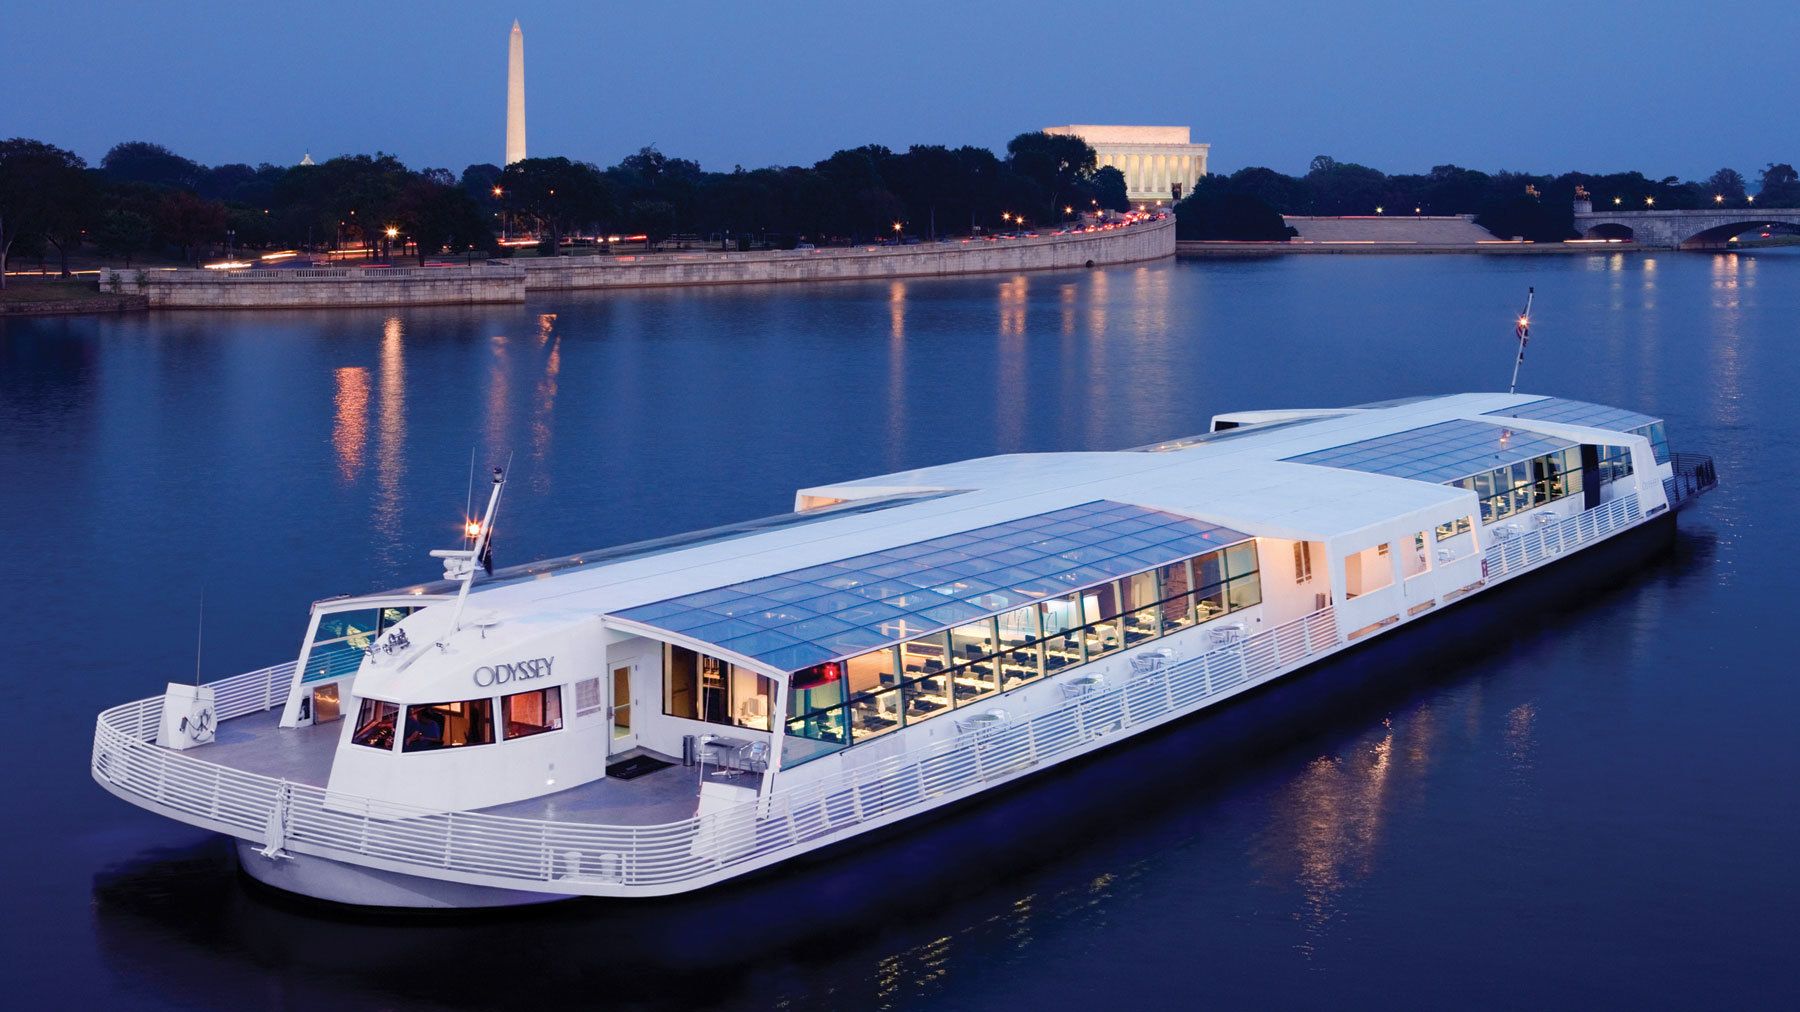 dinner cruise on the odyssey